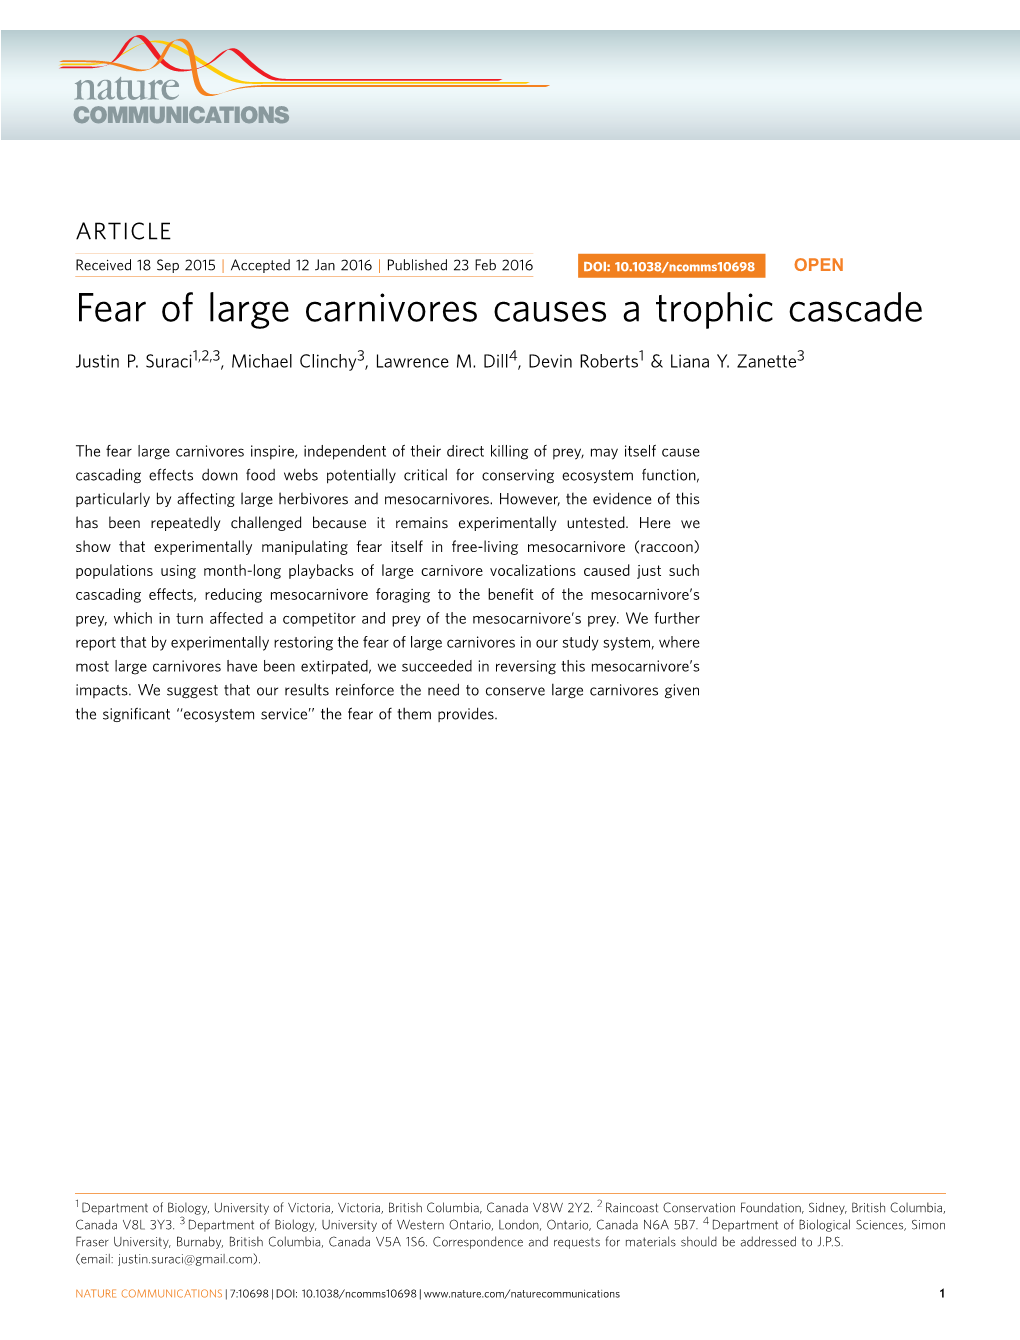 Fear of Large Carnivores Causes a Trophic Cascade